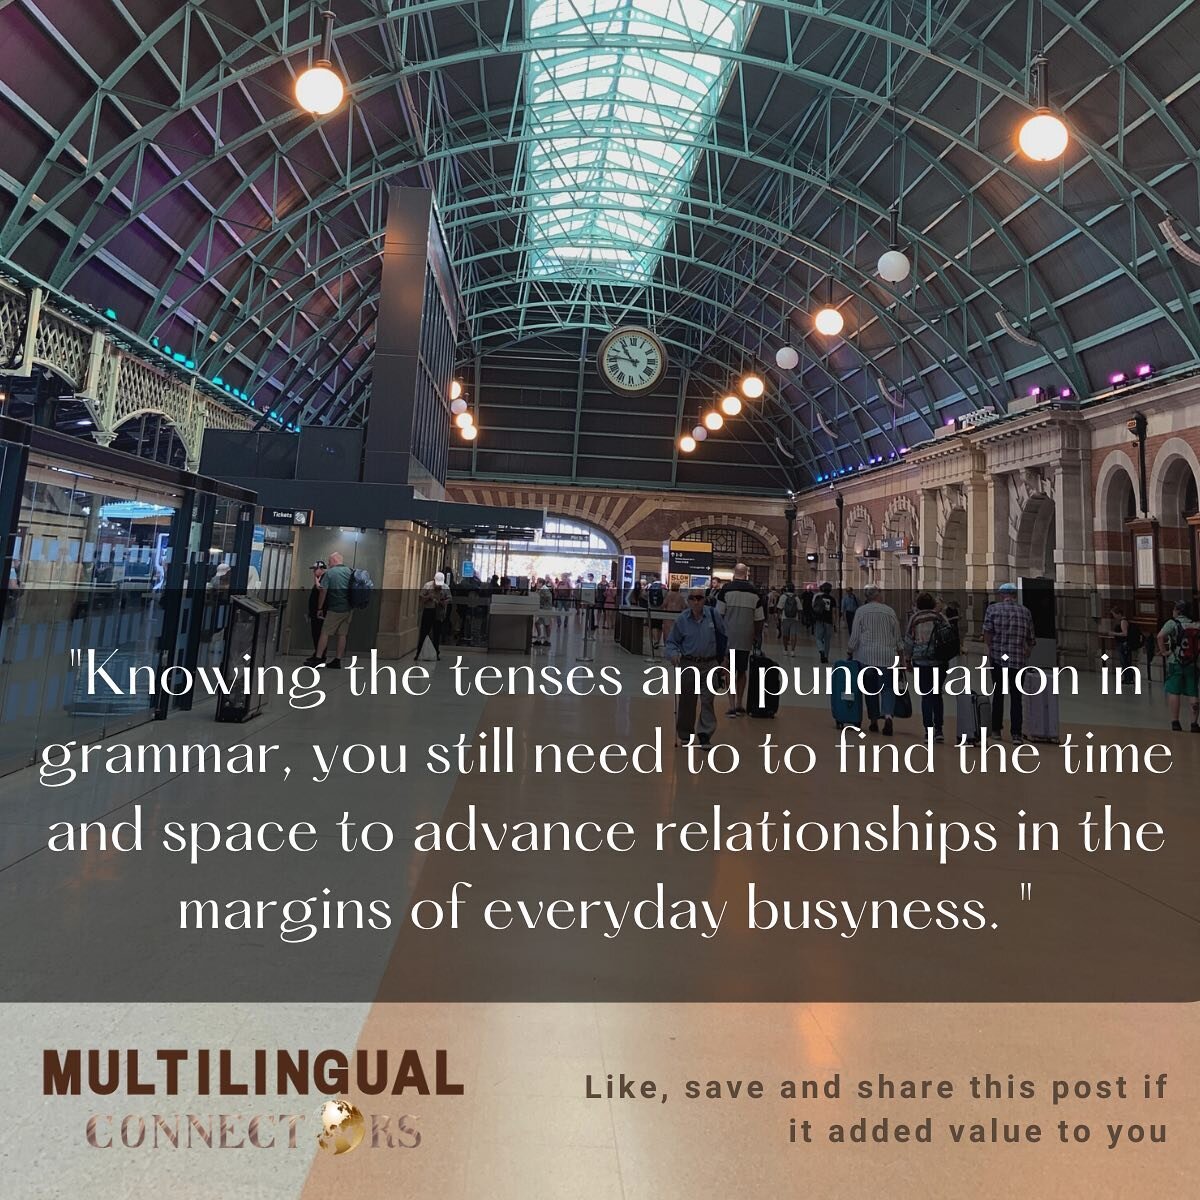 Are you challenged to find the time and space to build connections? If so, why?

Let me know your thoughts in the comments or DM.

@daisywu.multilingualconnector 
#inspiringwomen women #migrantwomen #multicultural #femalepreneur multiculturalwomen #i